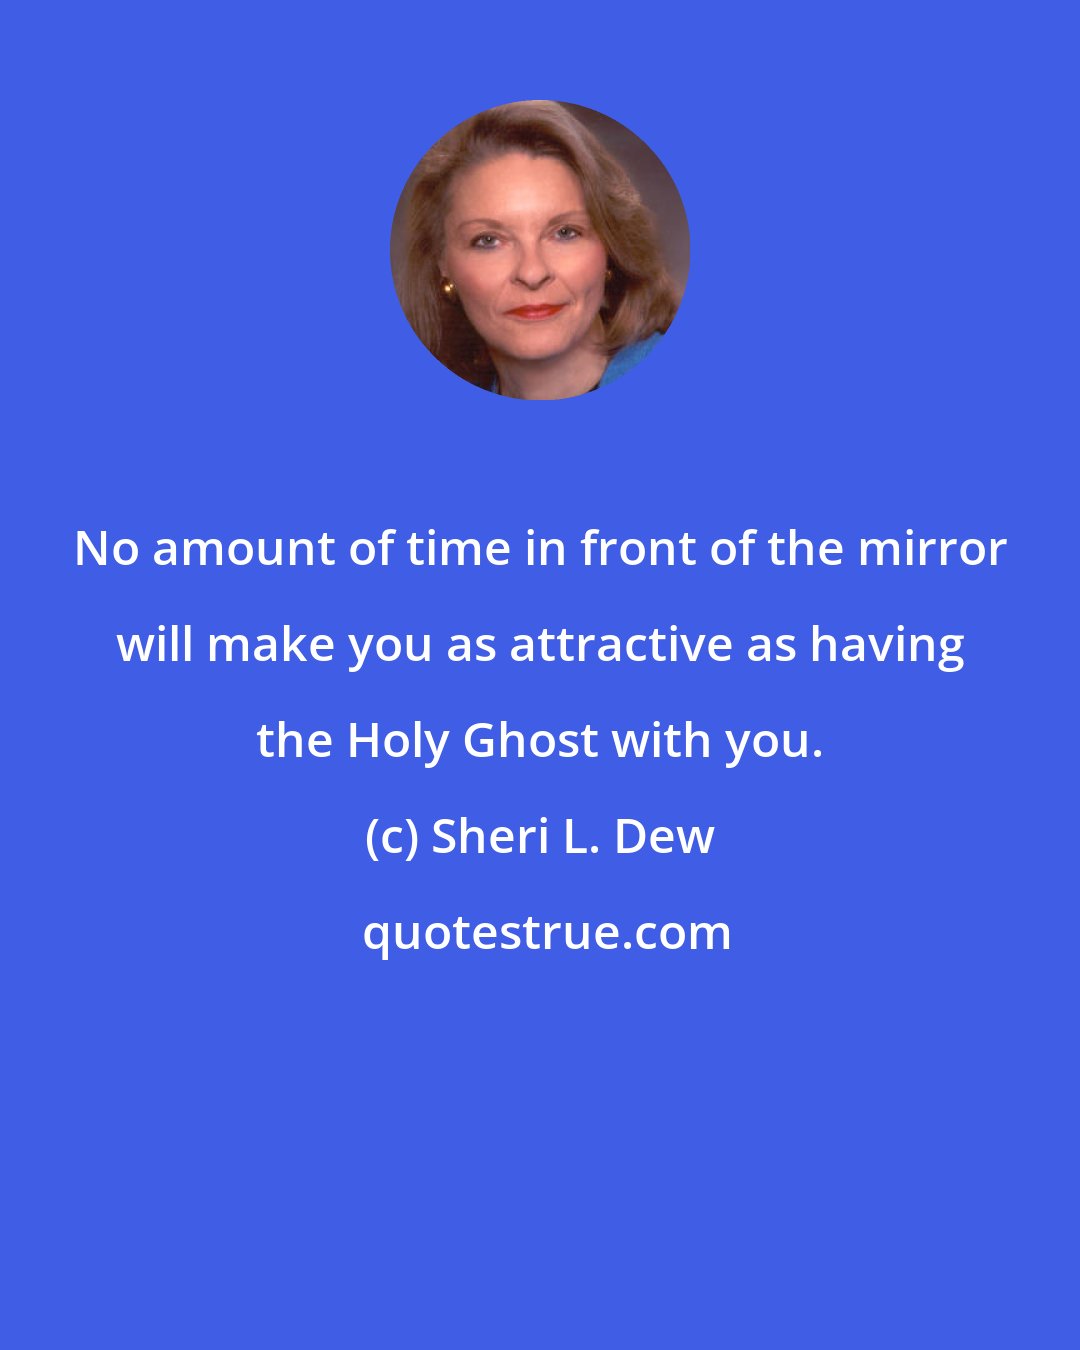 Sheri L. Dew: No amount of time in front of the mirror will make you as attractive as having the Holy Ghost with you.